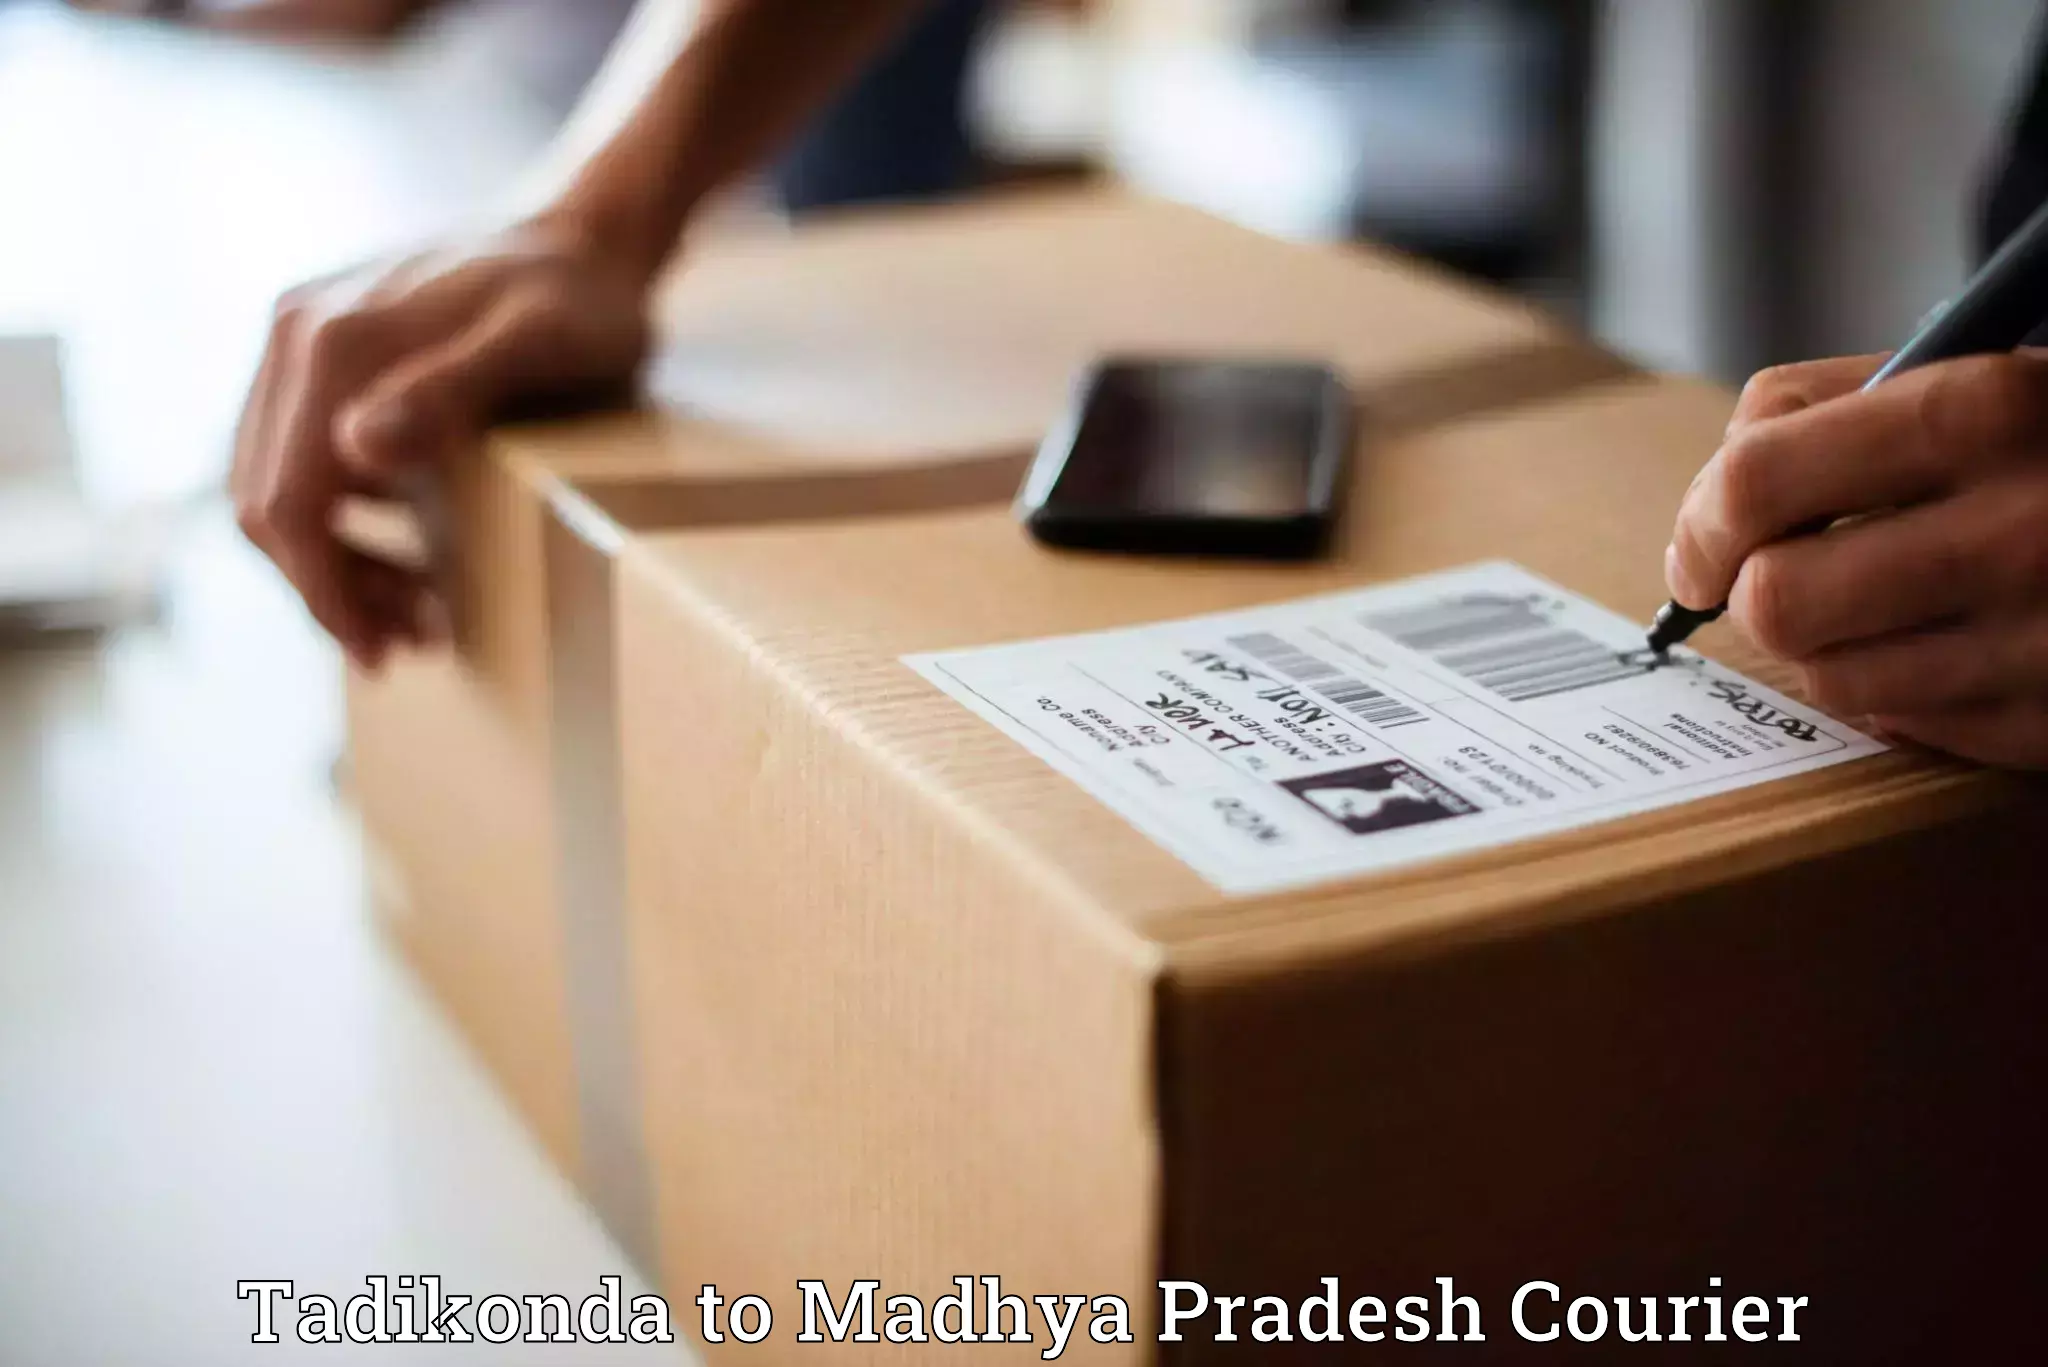 State-of-the-art courier technology Tadikonda to Satna